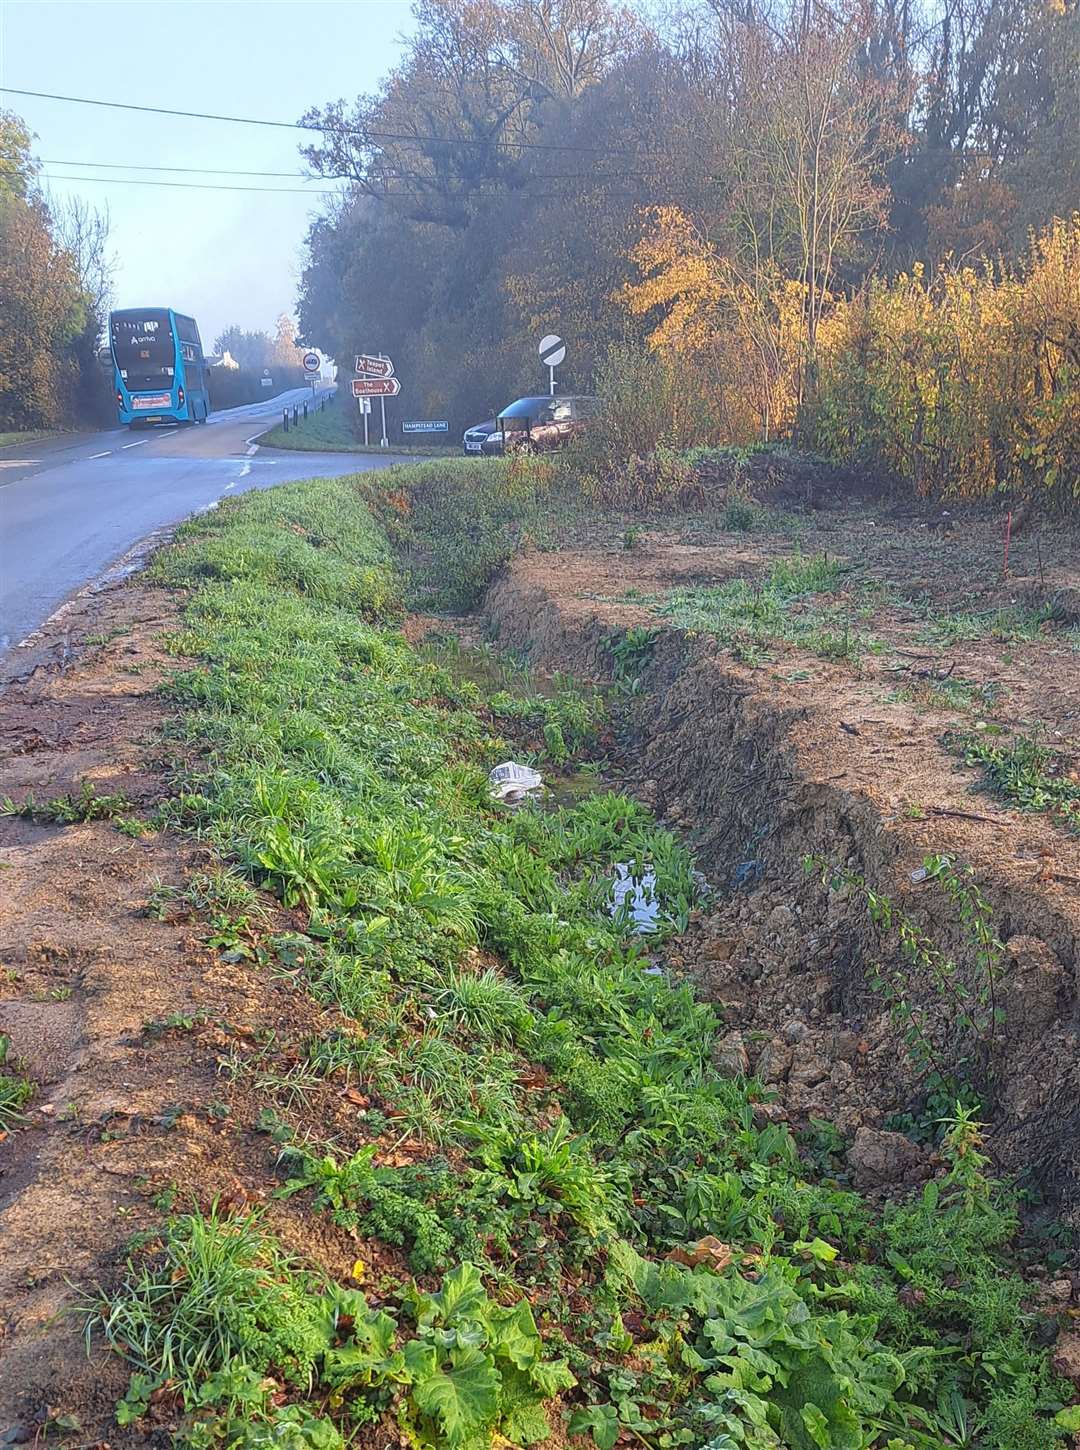 This ditch will have to be moved for the junction improvement to take place